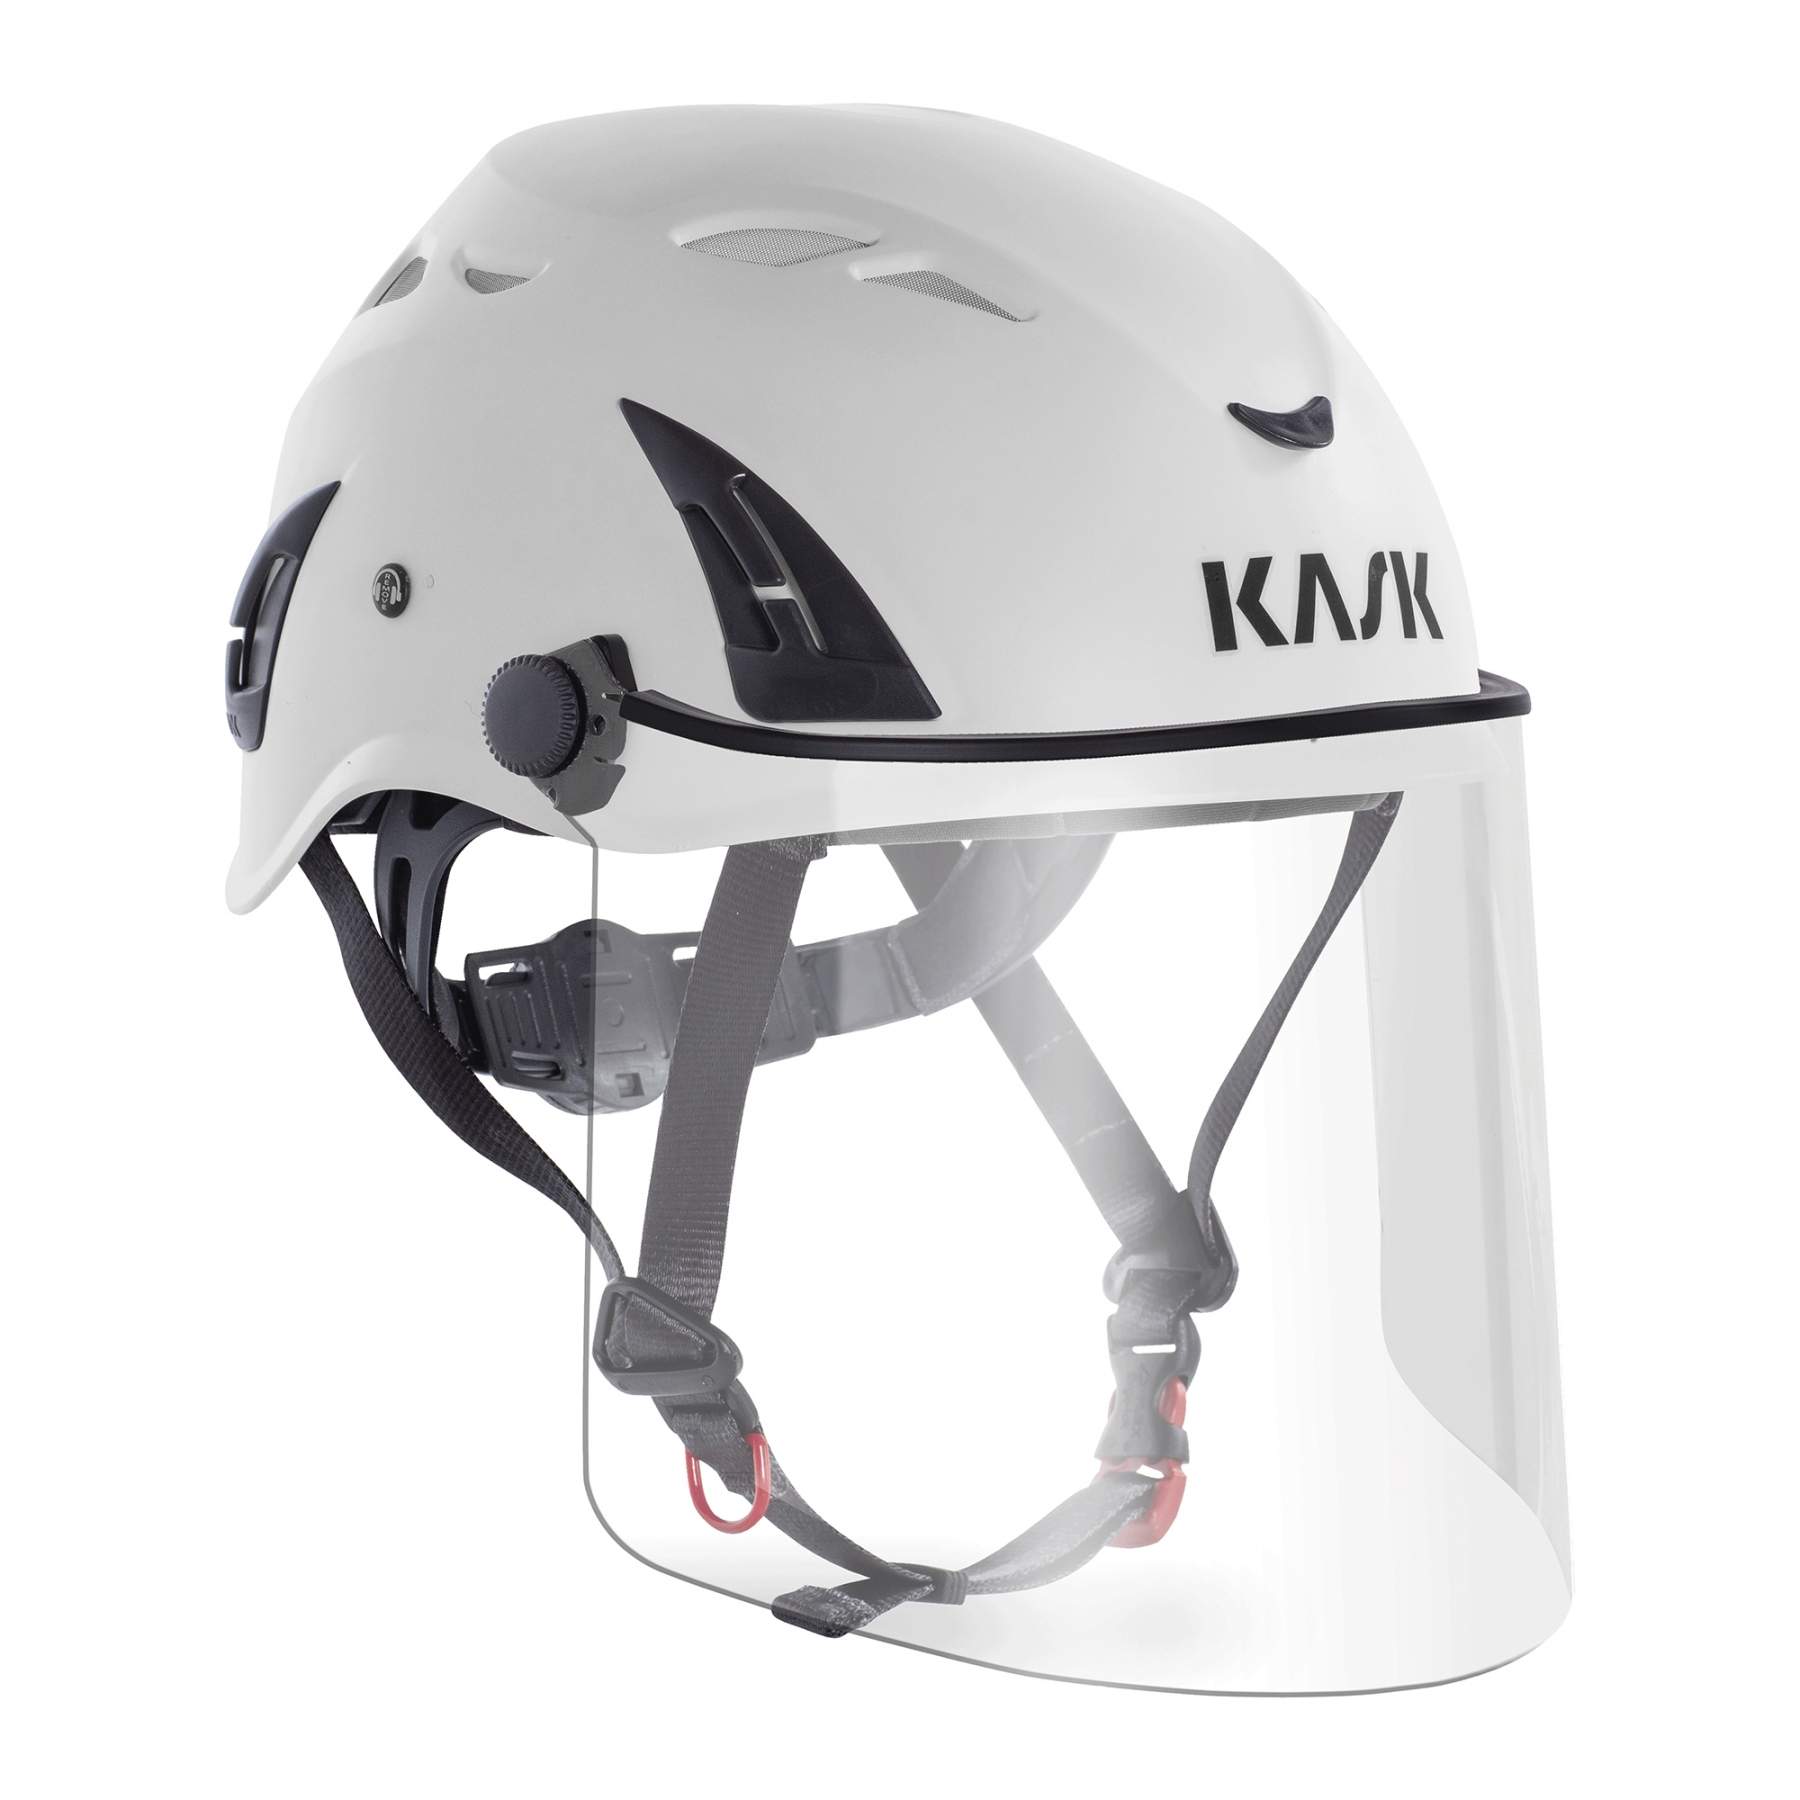 Kask Plasma Face Shield from Columbia Safety